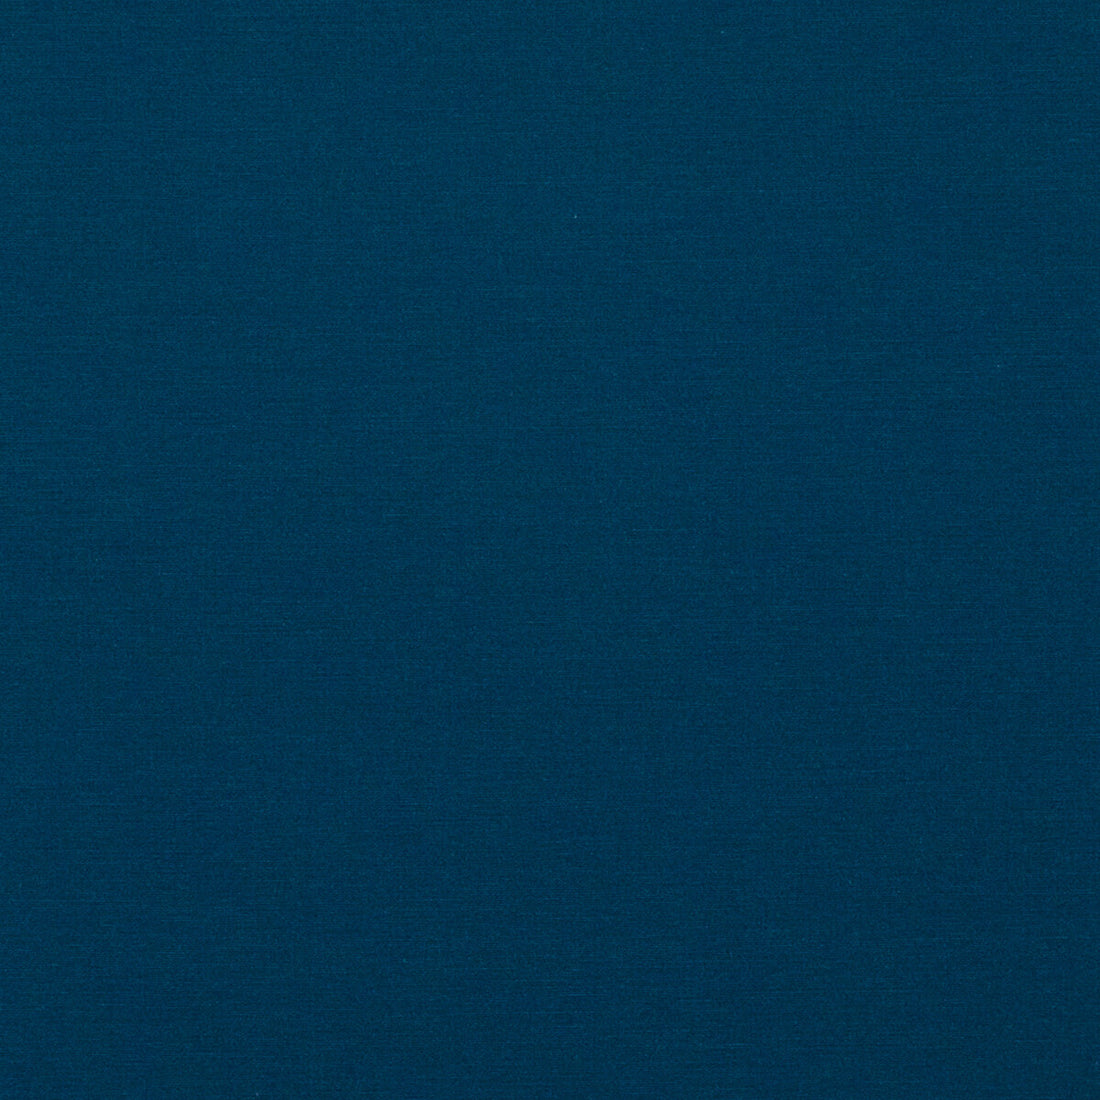 Pavilion fabric in indigo color - pattern PF50478.680.0 - by Baker Lifestyle in the Pavilion - Blegrave Notebook collection